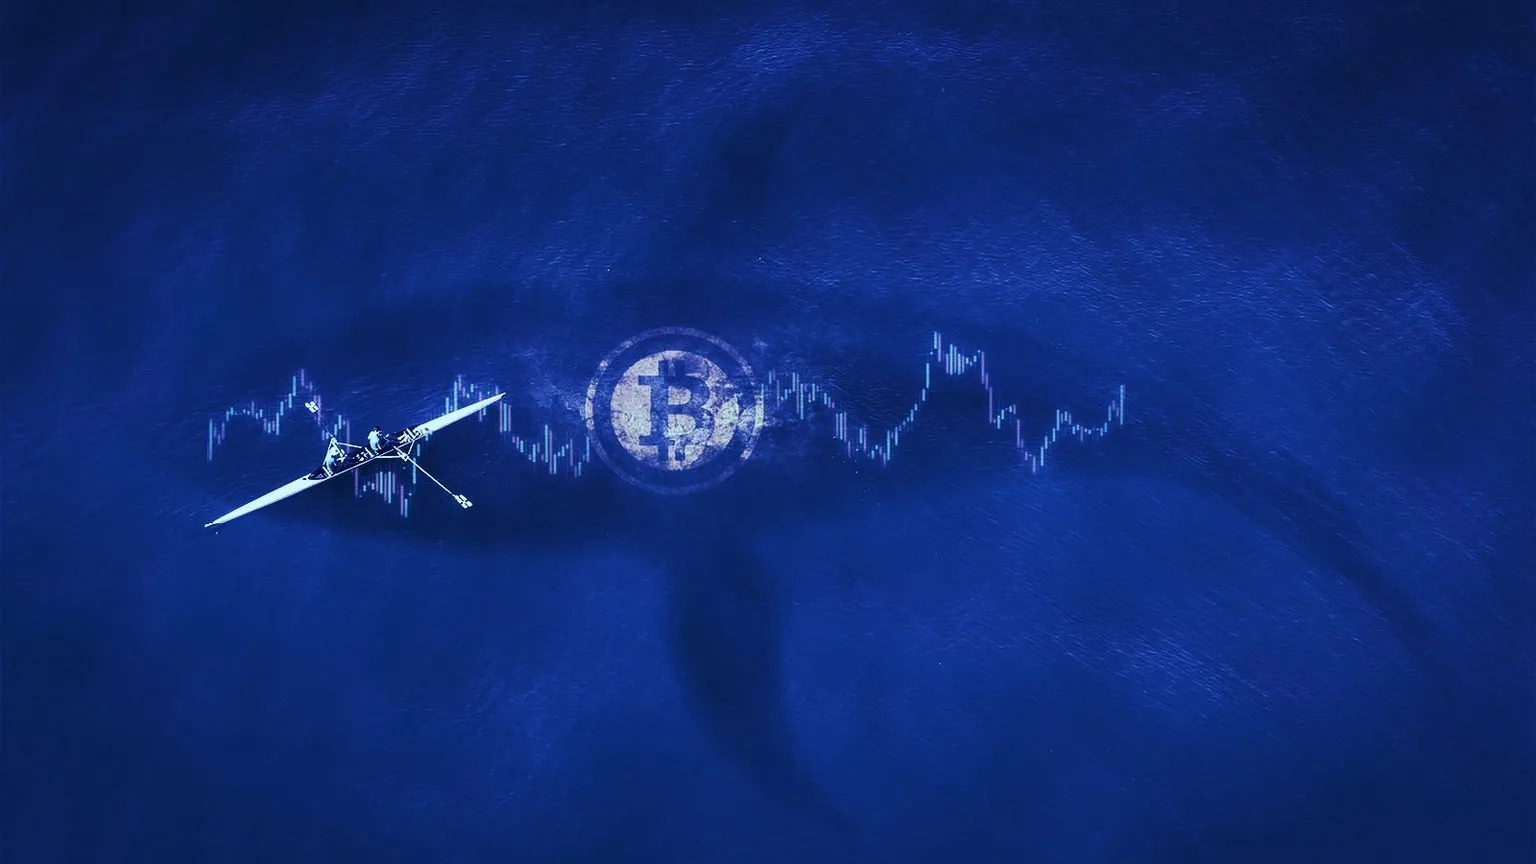 Bitcoin Whales. IMAGE: Shutterstock